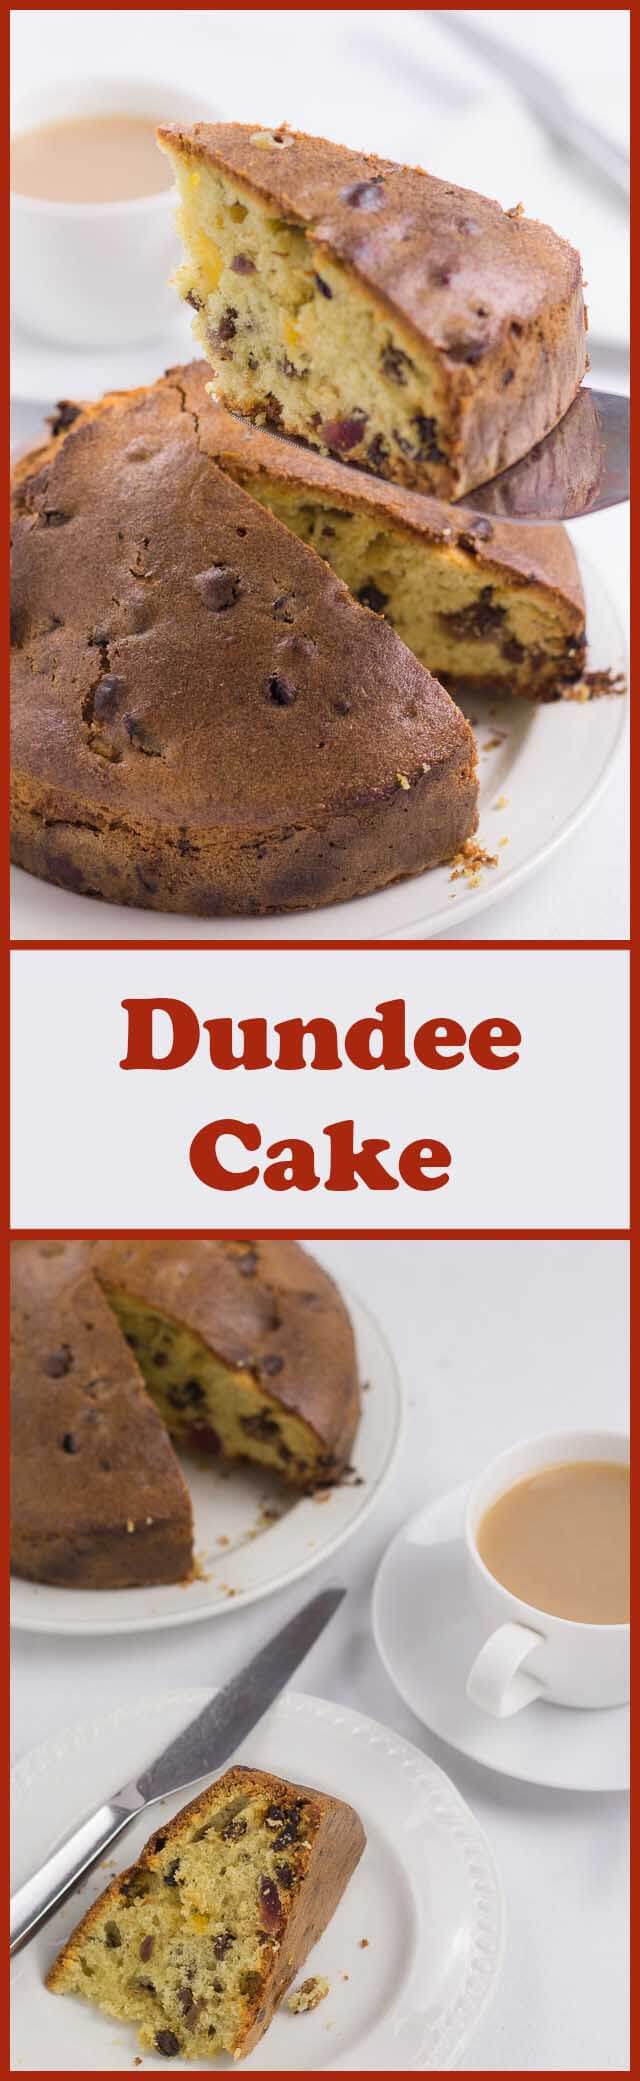 You’ll love my Dundee cake. It’s a lower calorie, lower fat version of the traditional Scottish fruit cake made with mixed fruit and a delicate light spice taste to tantalise the taste buds.